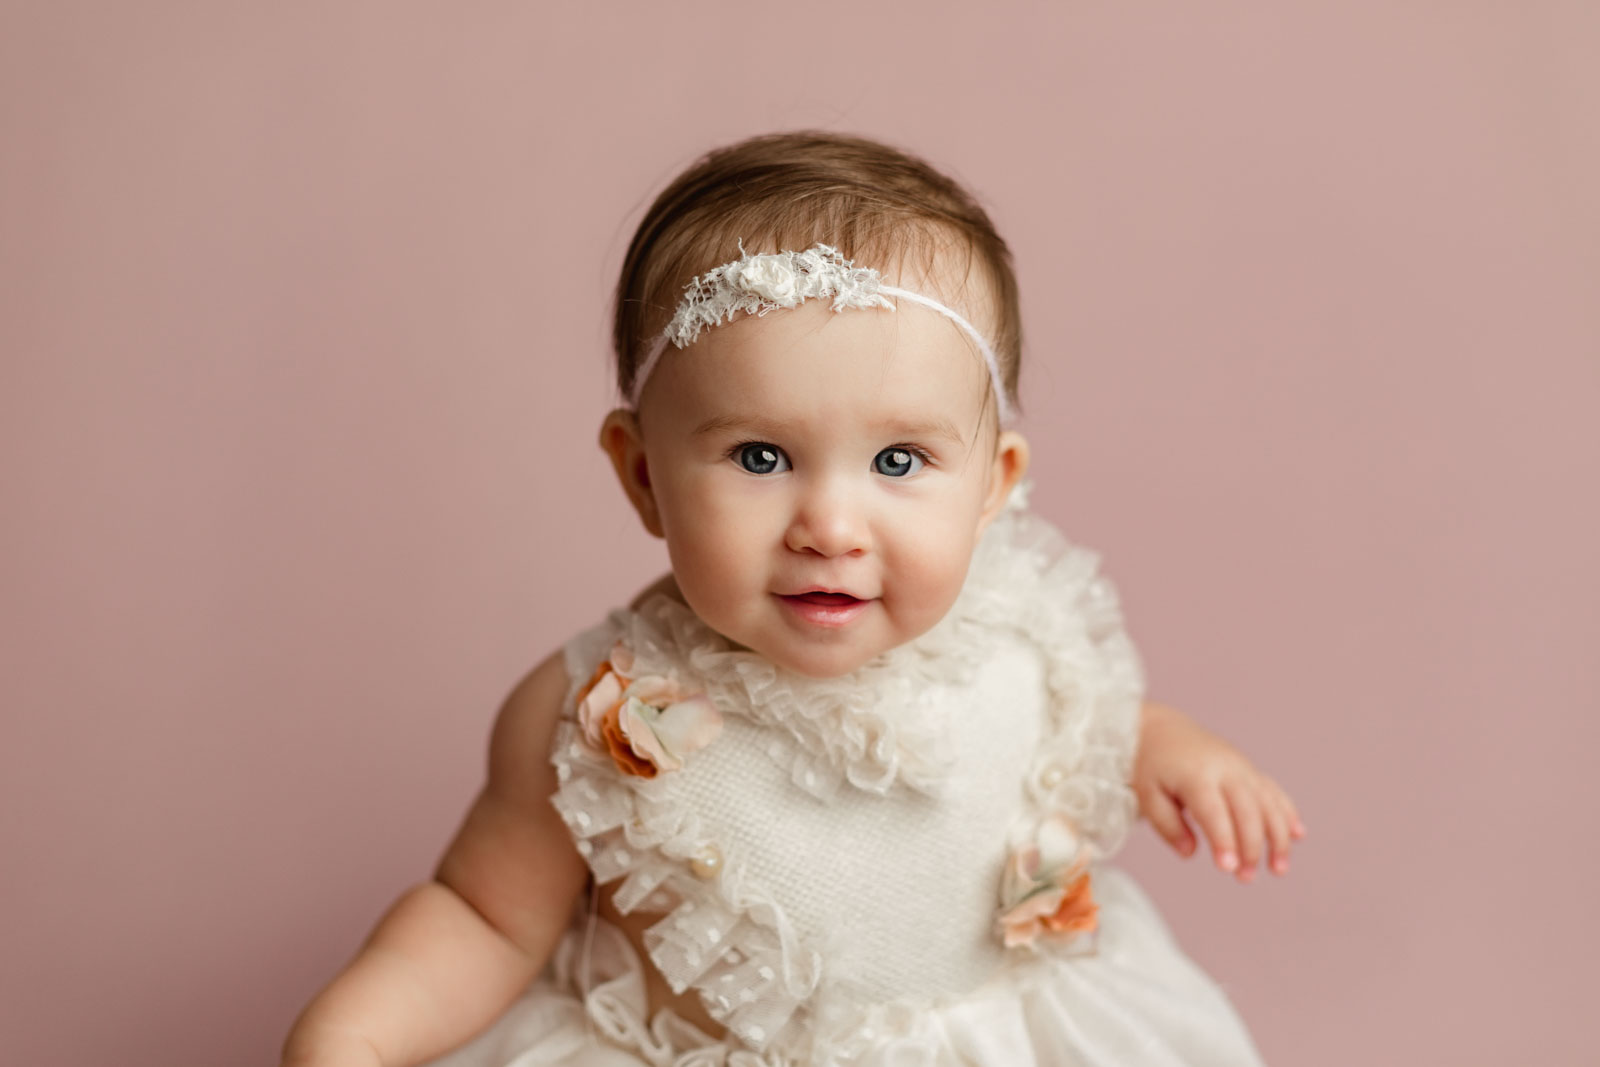 small baby girl sitting with smile, wearing a cream dress with heart shaped top